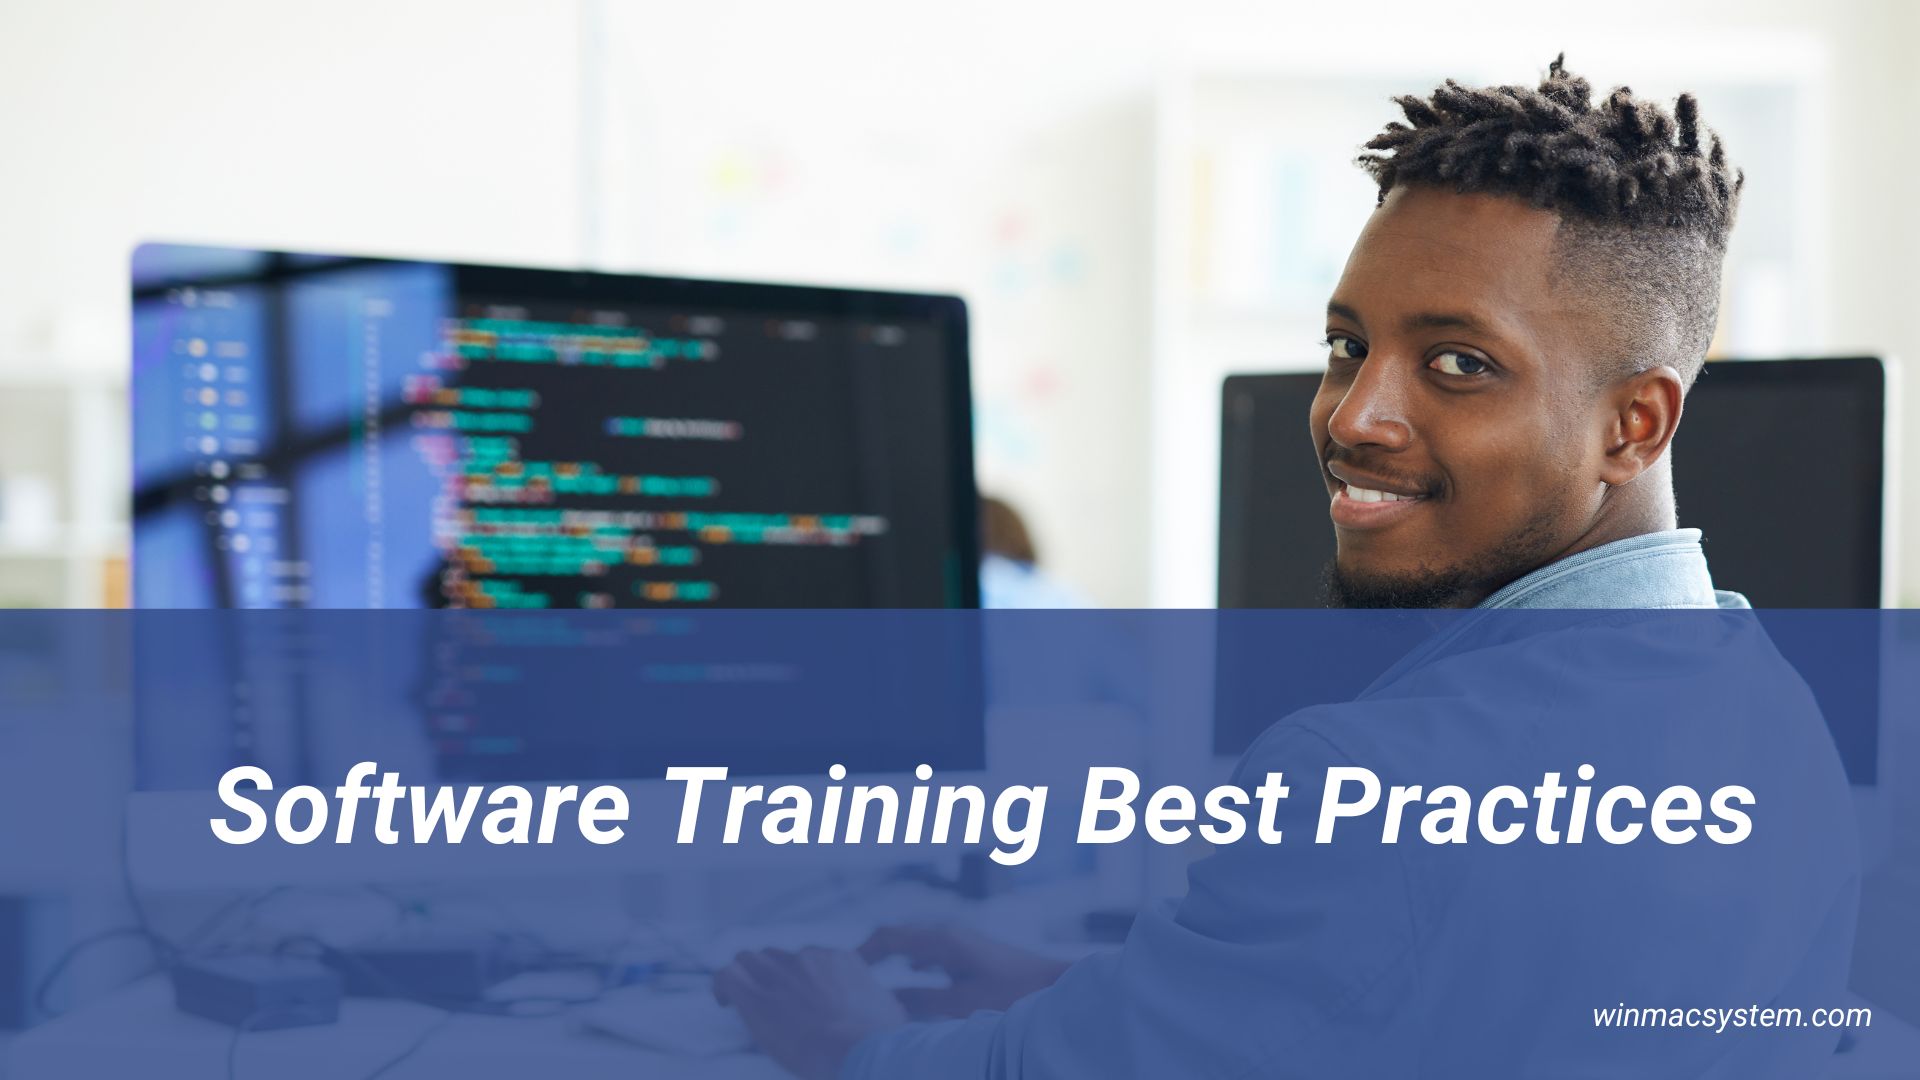 Software Training Best Practices